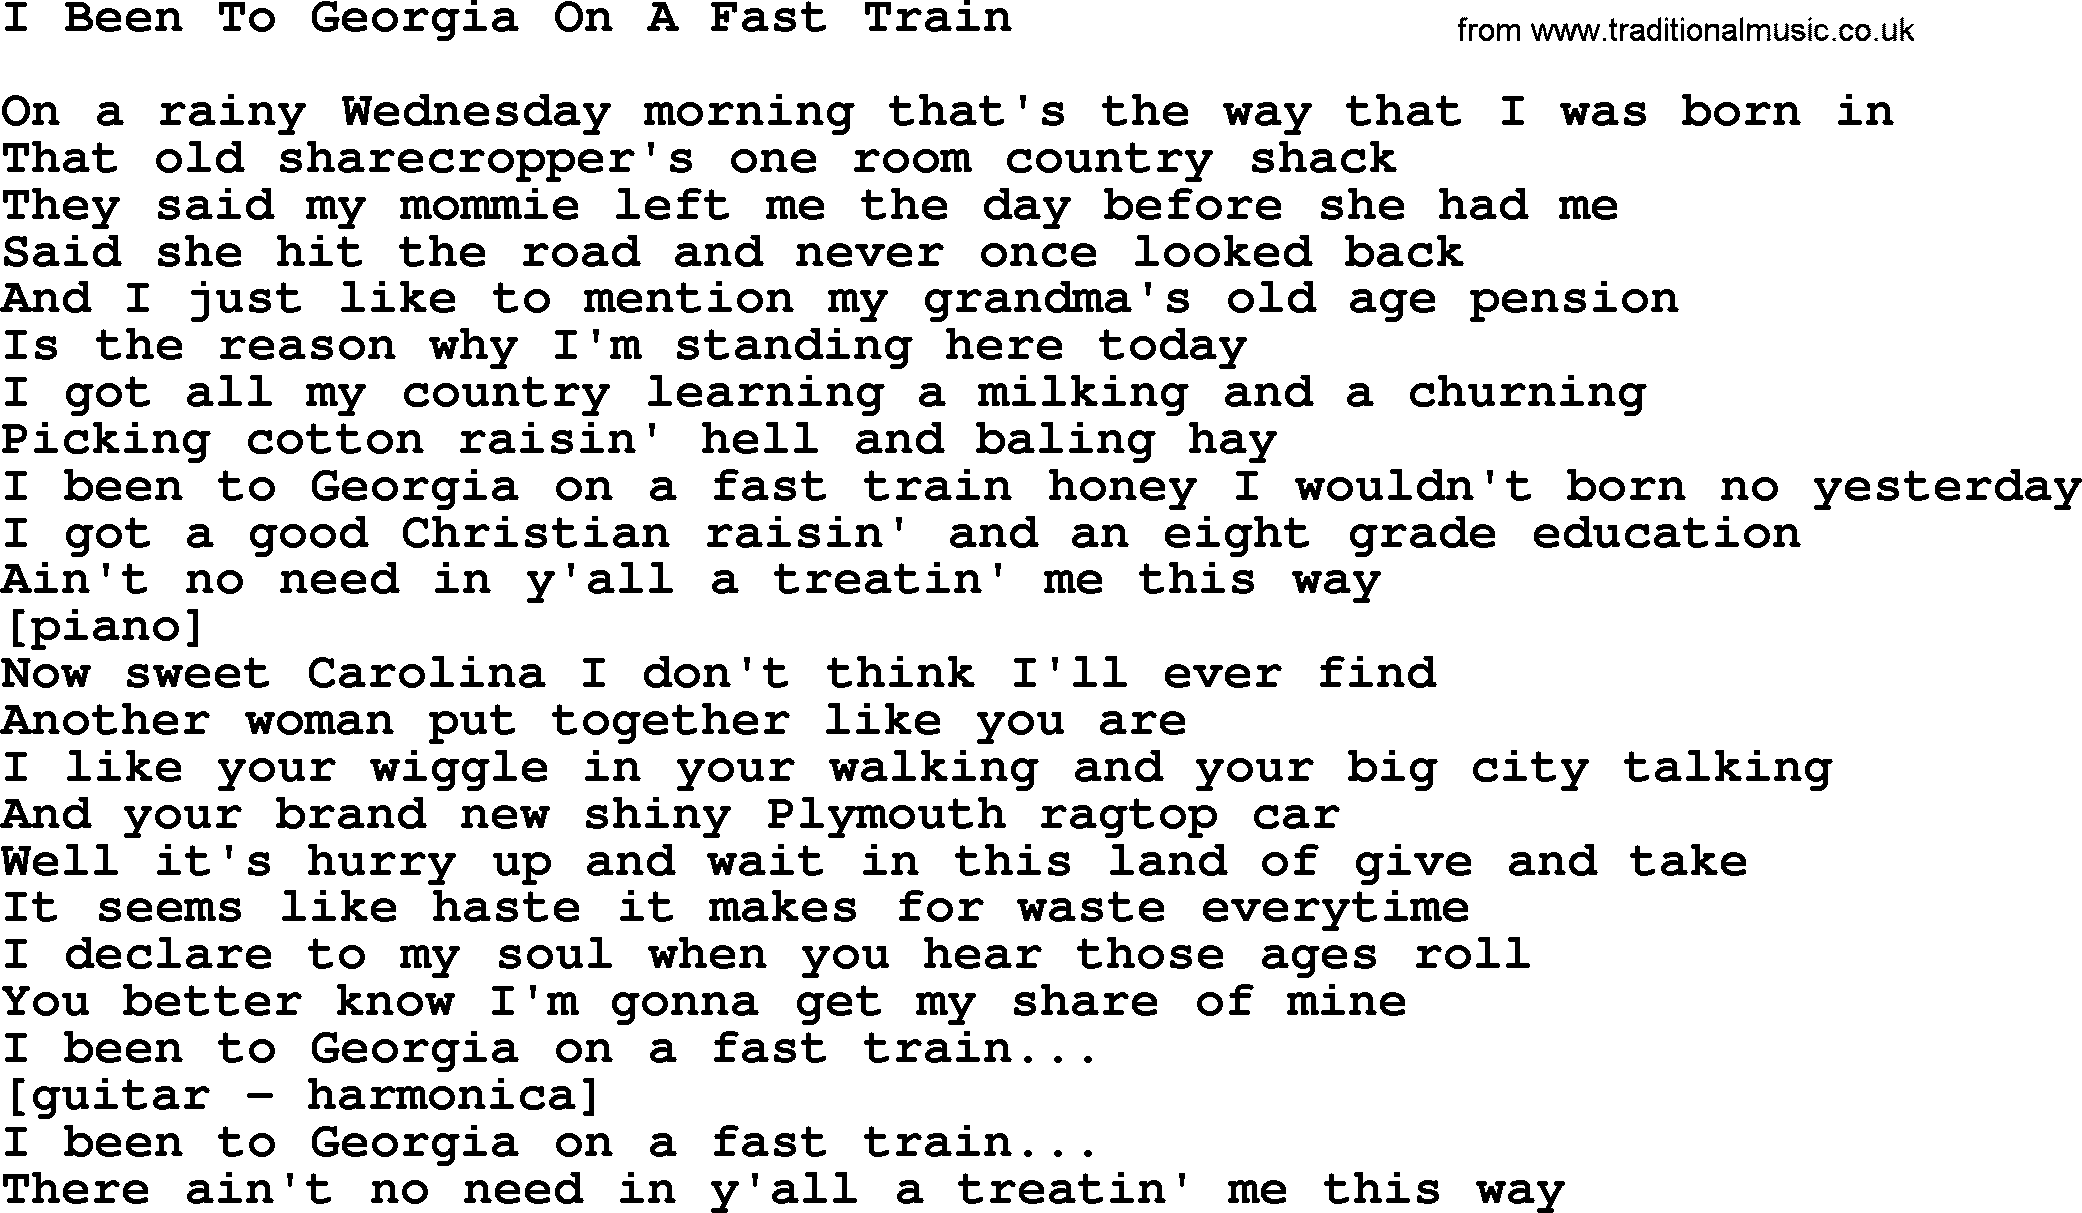 Willie Nelson song: I Been To Georgia On A Fast Train lyrics